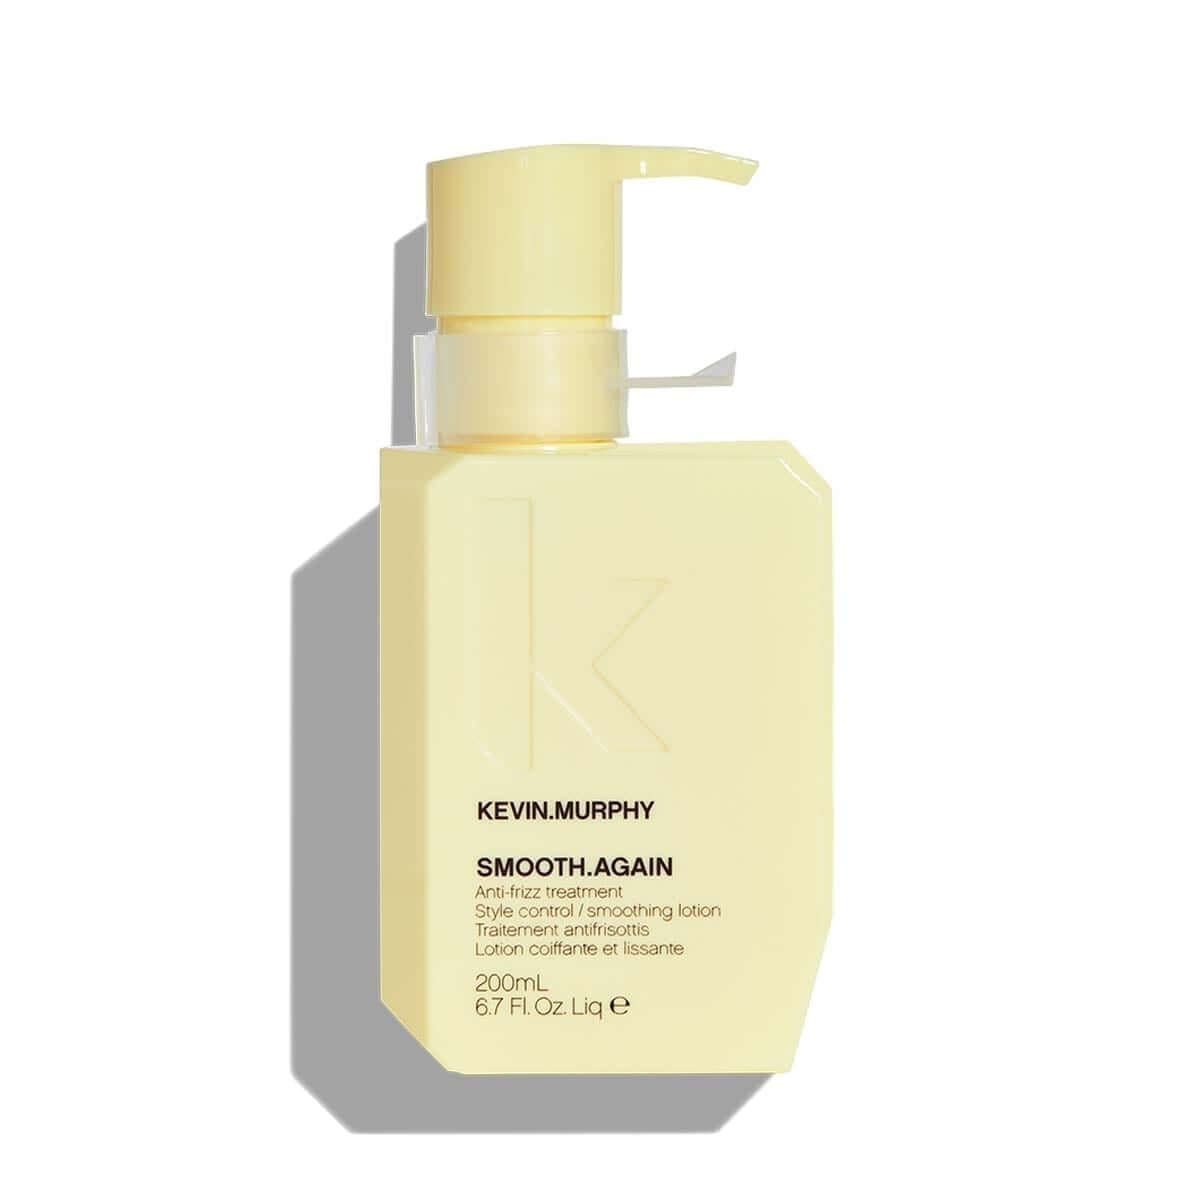 Kevin.Murphy Smooth.Again 200mL